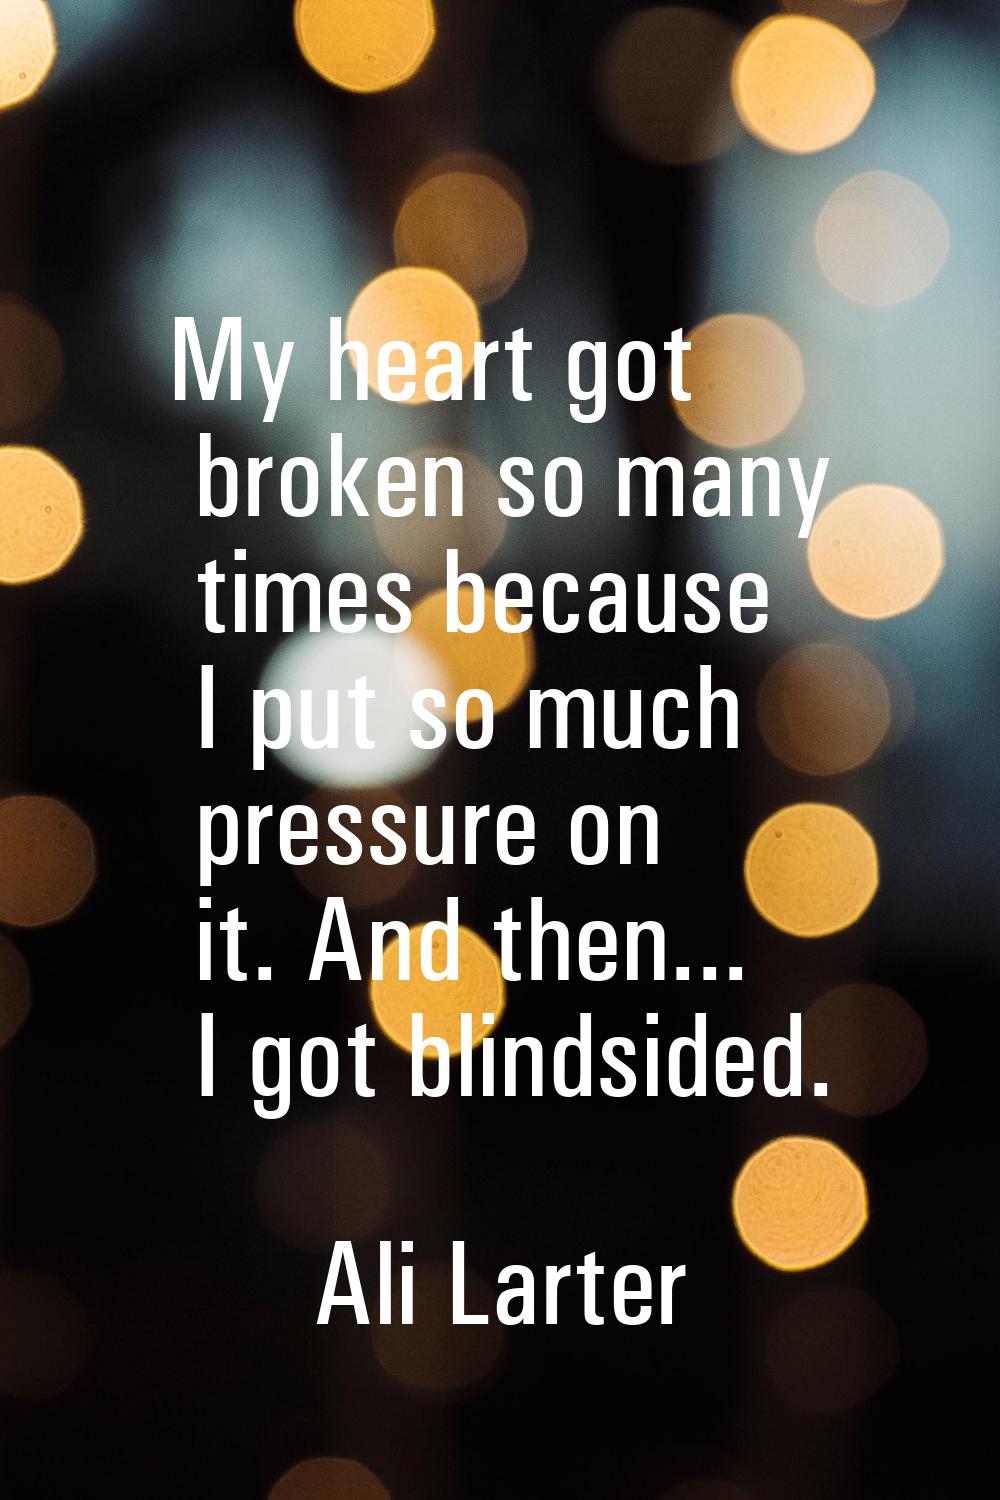 My heart got broken so many times because I put so much pressure on it. And then... I got blindside